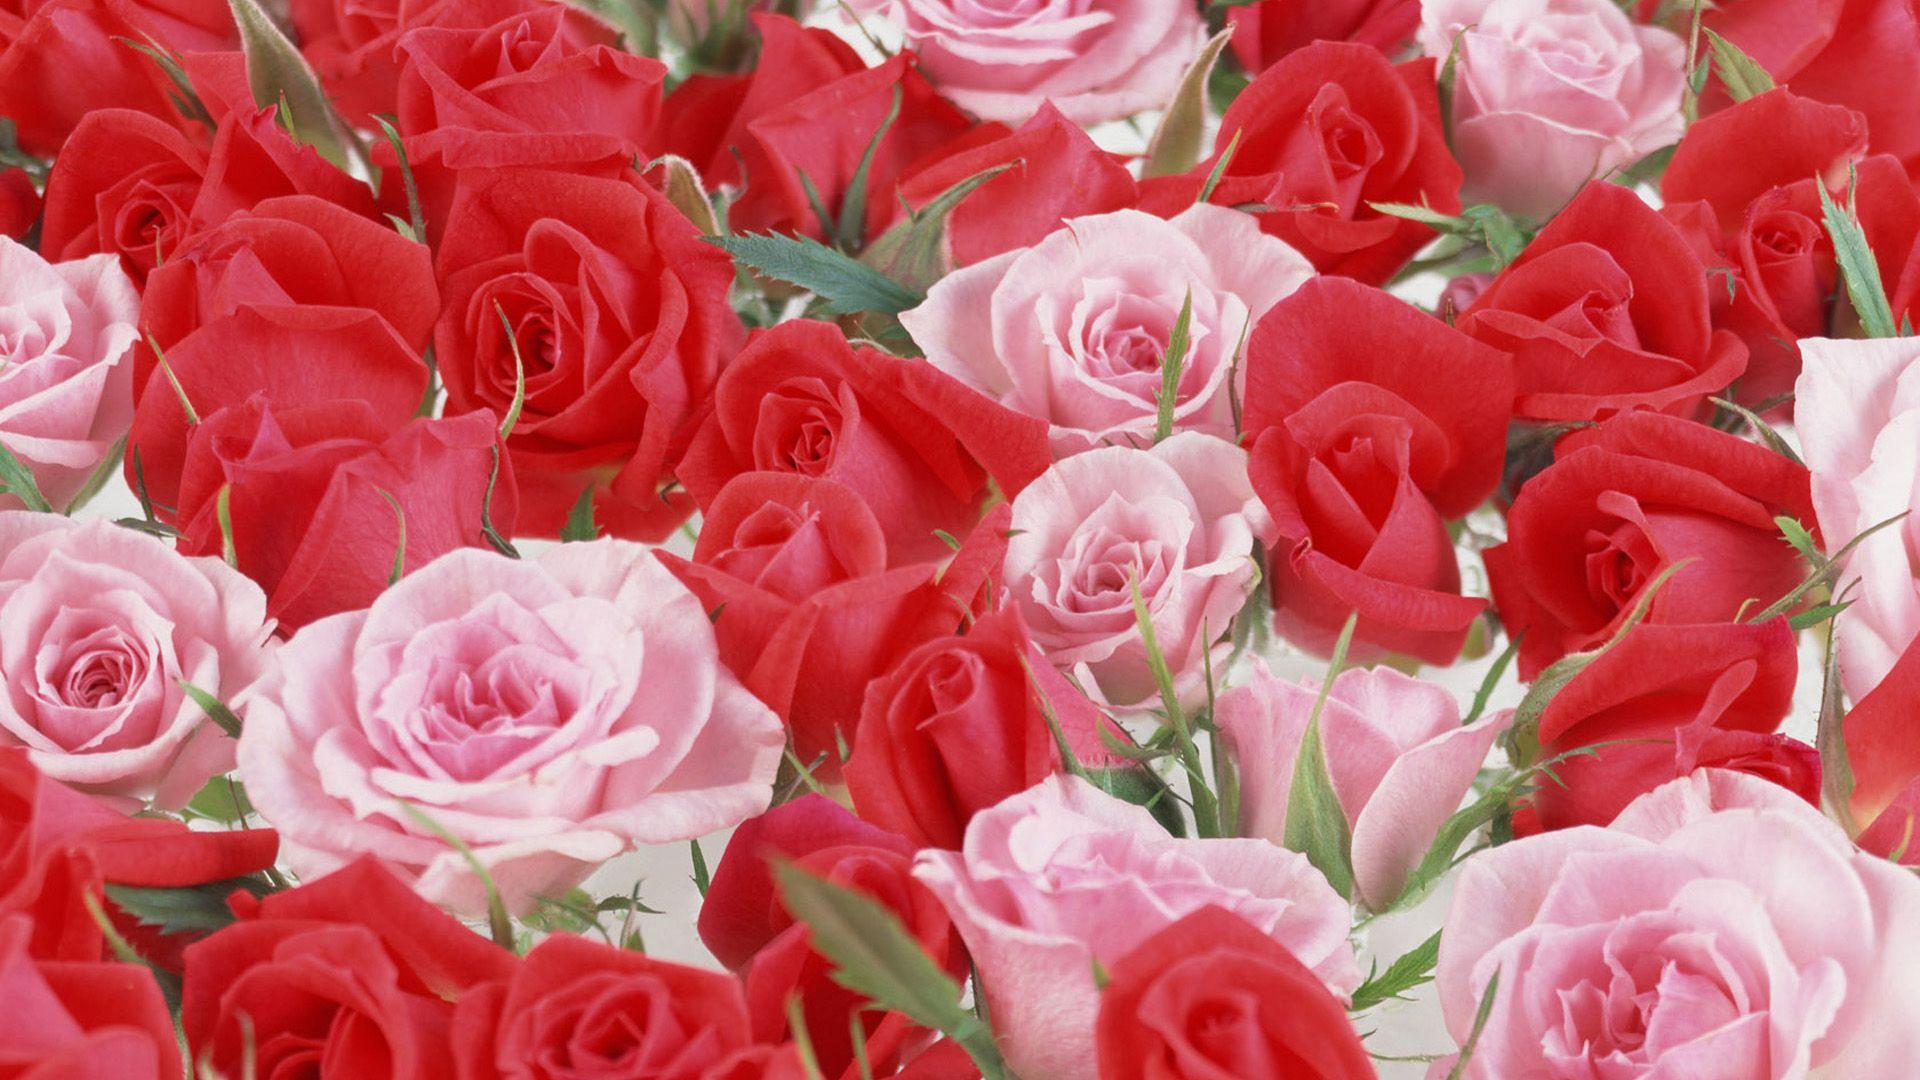 Red And Pink Roses Wallpapers Pics - Wallpaper Cave